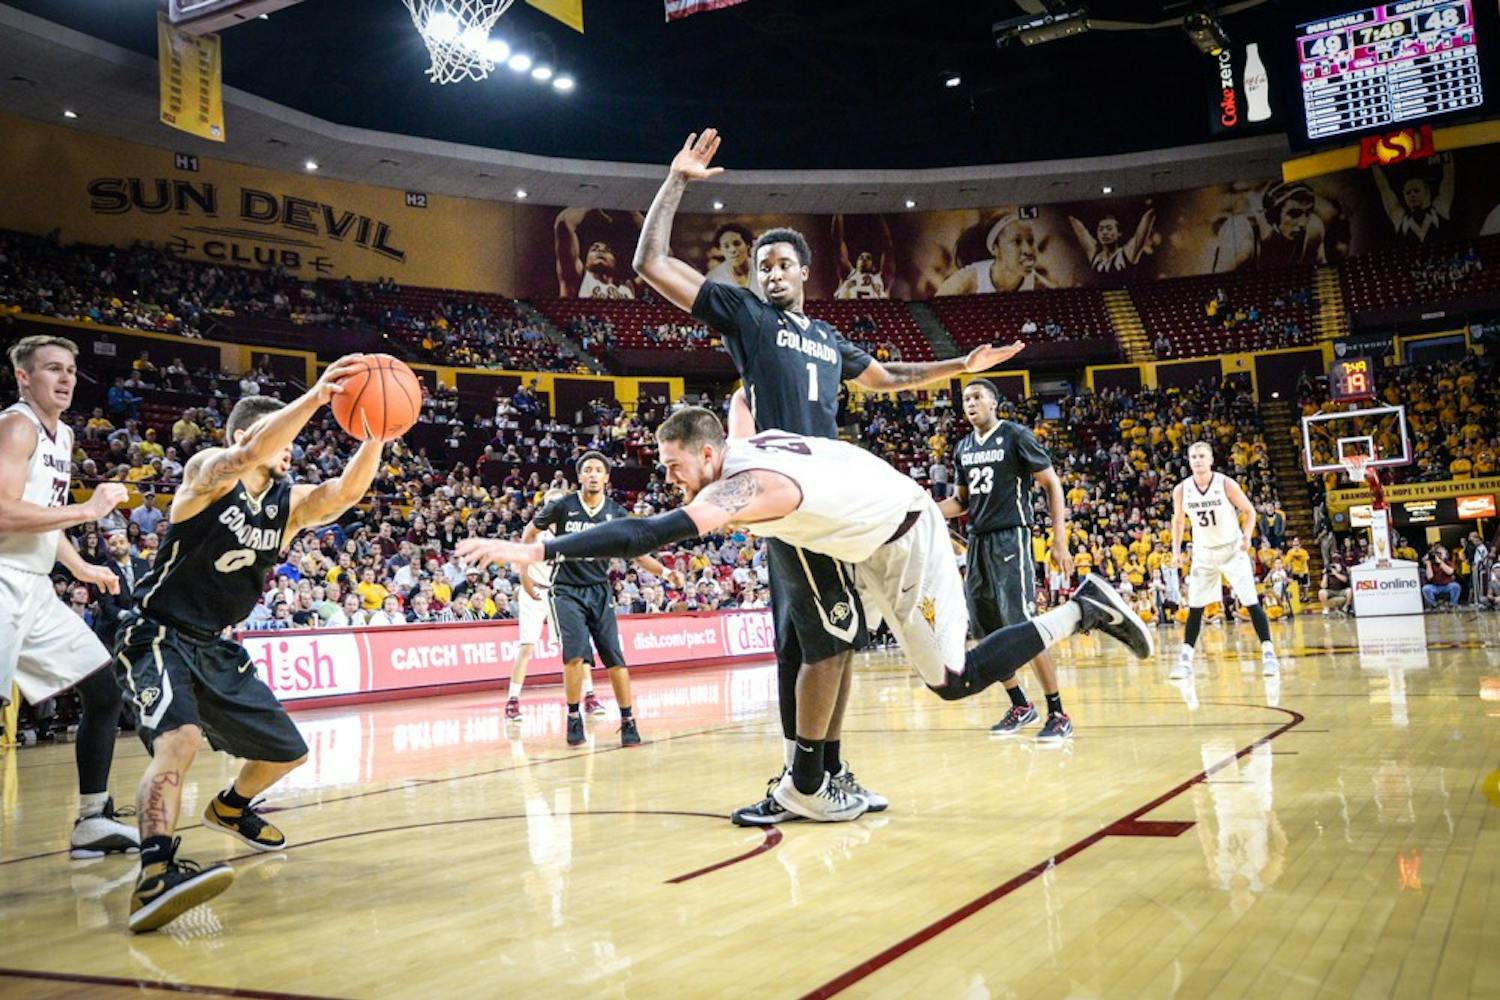 Junior Eric Jacobsen dives in an attempt to recover the rebound in a game against the Colorado Buffaloes on Saturday, Jan. 17, 2015 at Wells Fargo Arena in Tempe.